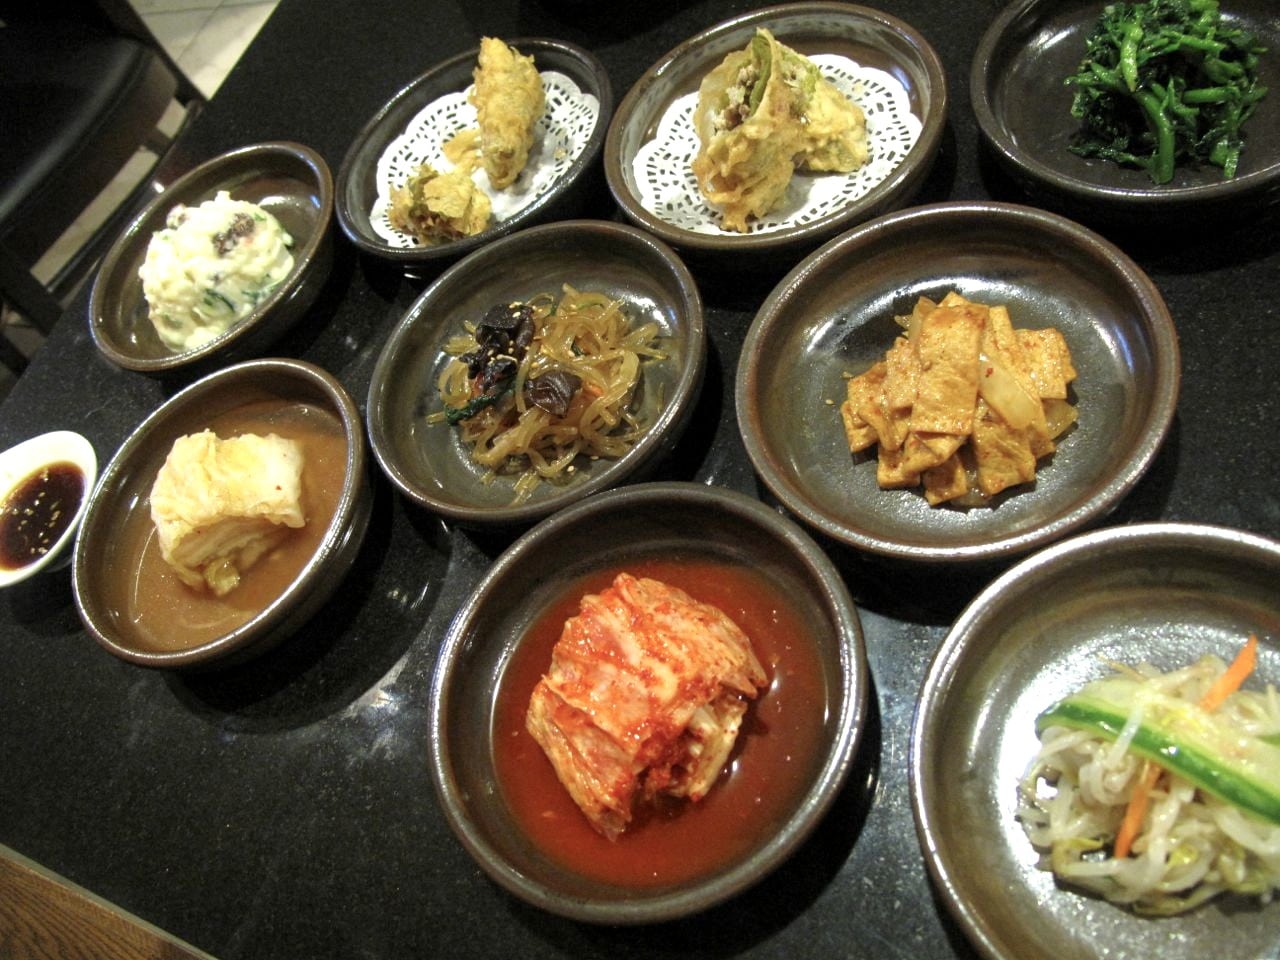 A selection of Korean small plates known as Banchan.